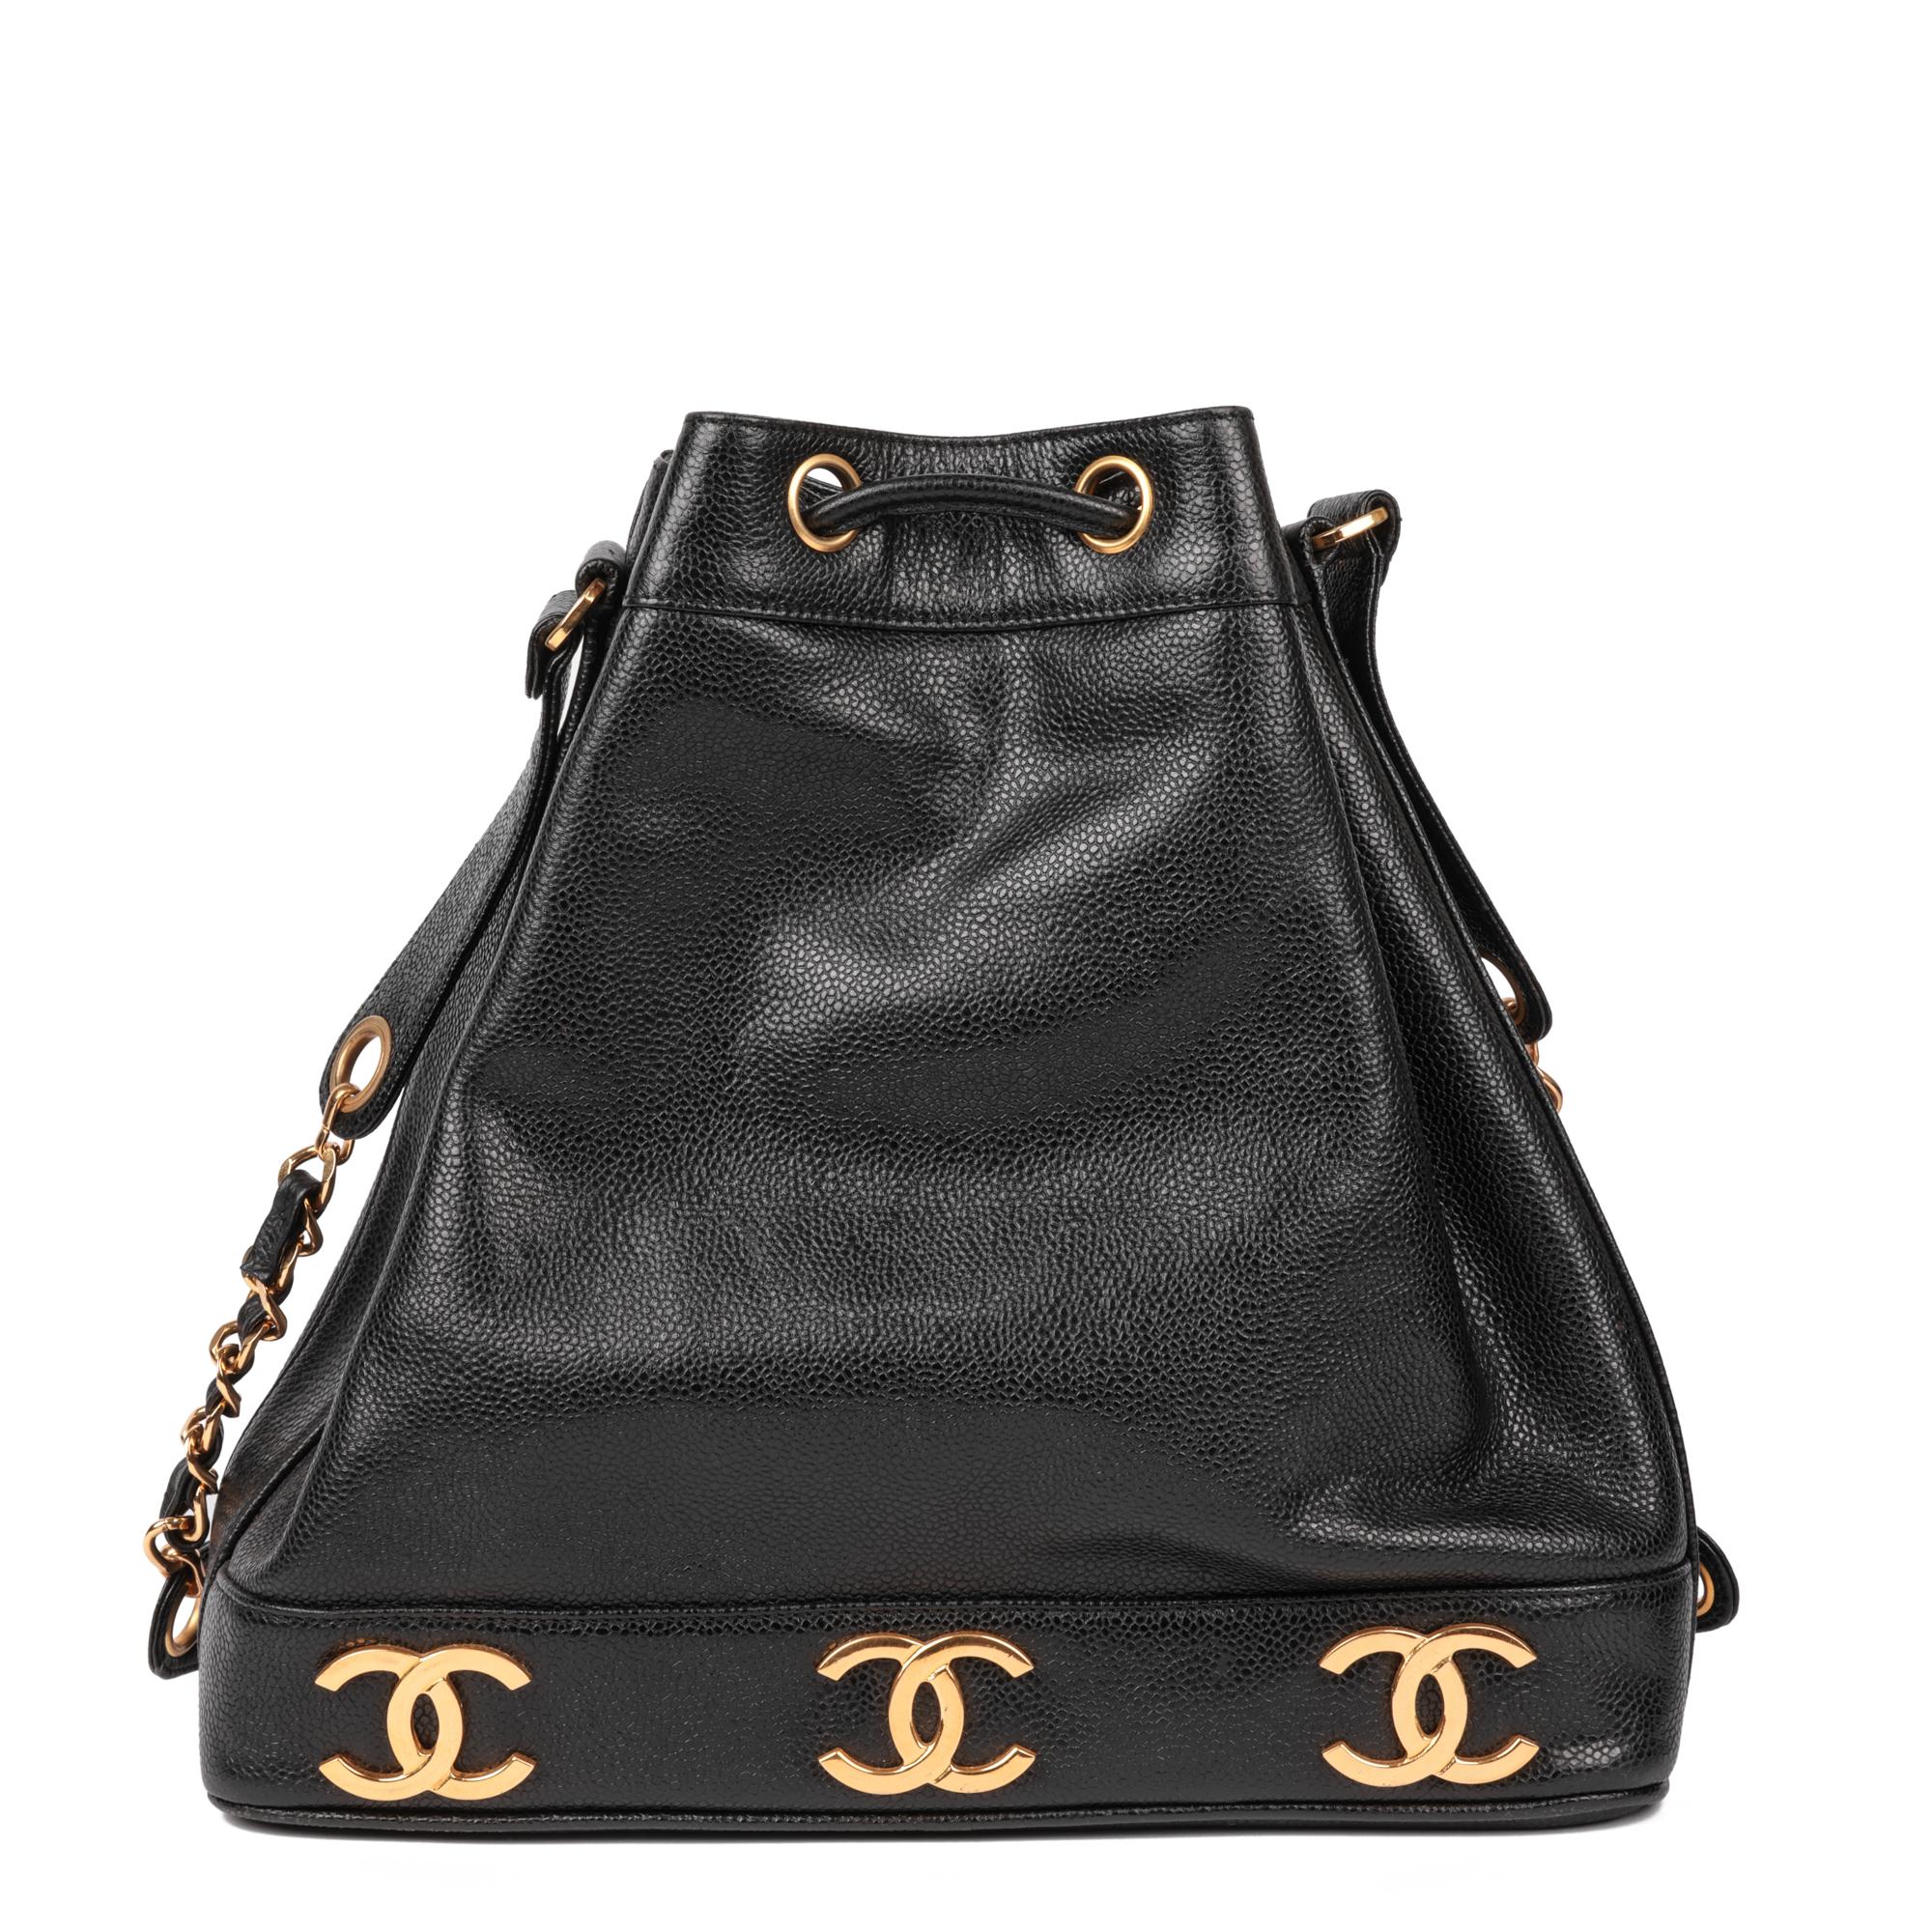 CHANEL Black Caviar Leather Vintage Classic Logo Trim Bucket Bag with Pouch For Sale 1